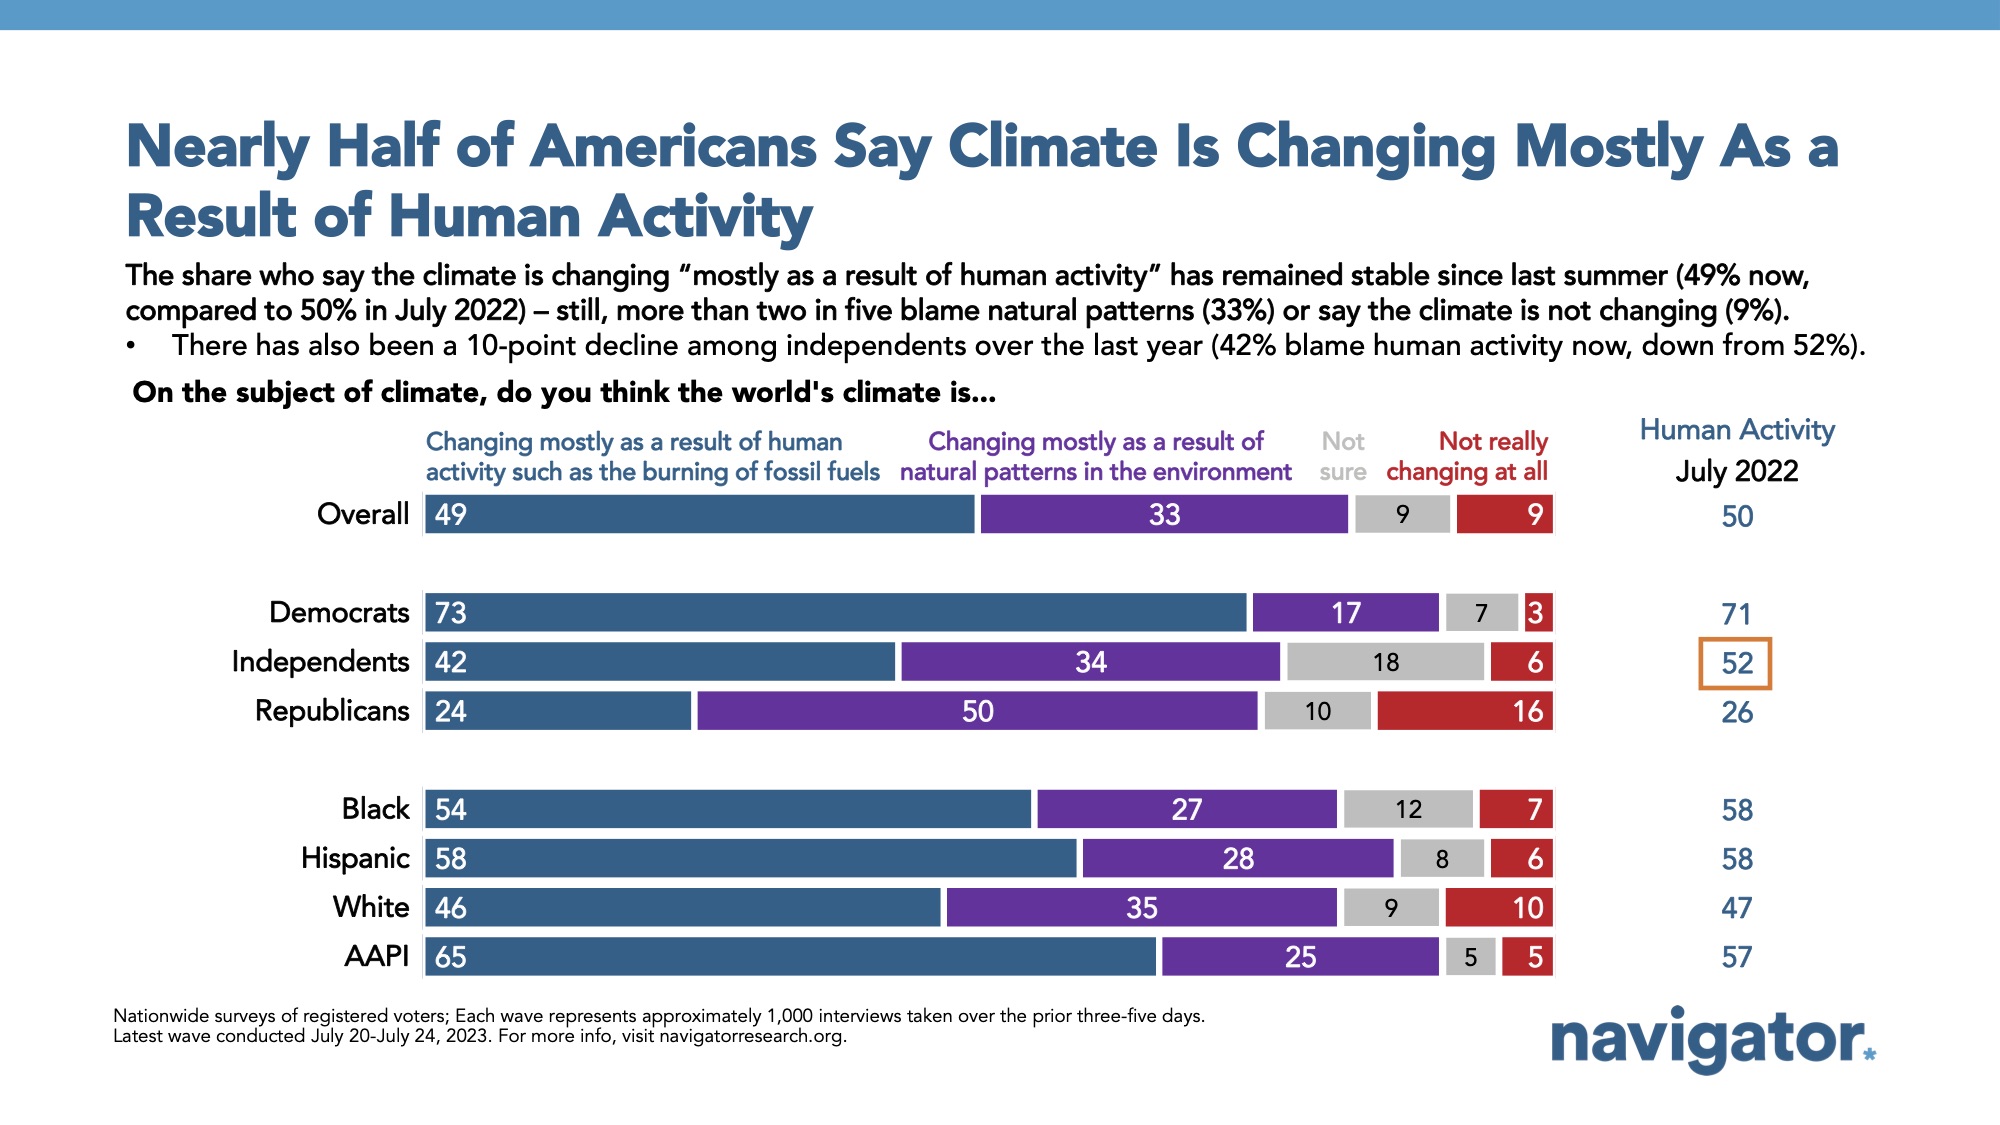 Survey results to the following prompt: On the subject of climate, do you think the world's climate is... a. Changing mostly as a result of human activity such as the burning of fossil fuels. b. Changing mostly as a result of natural patterns in the environment. c. Not sure. d. Not really changing at all.